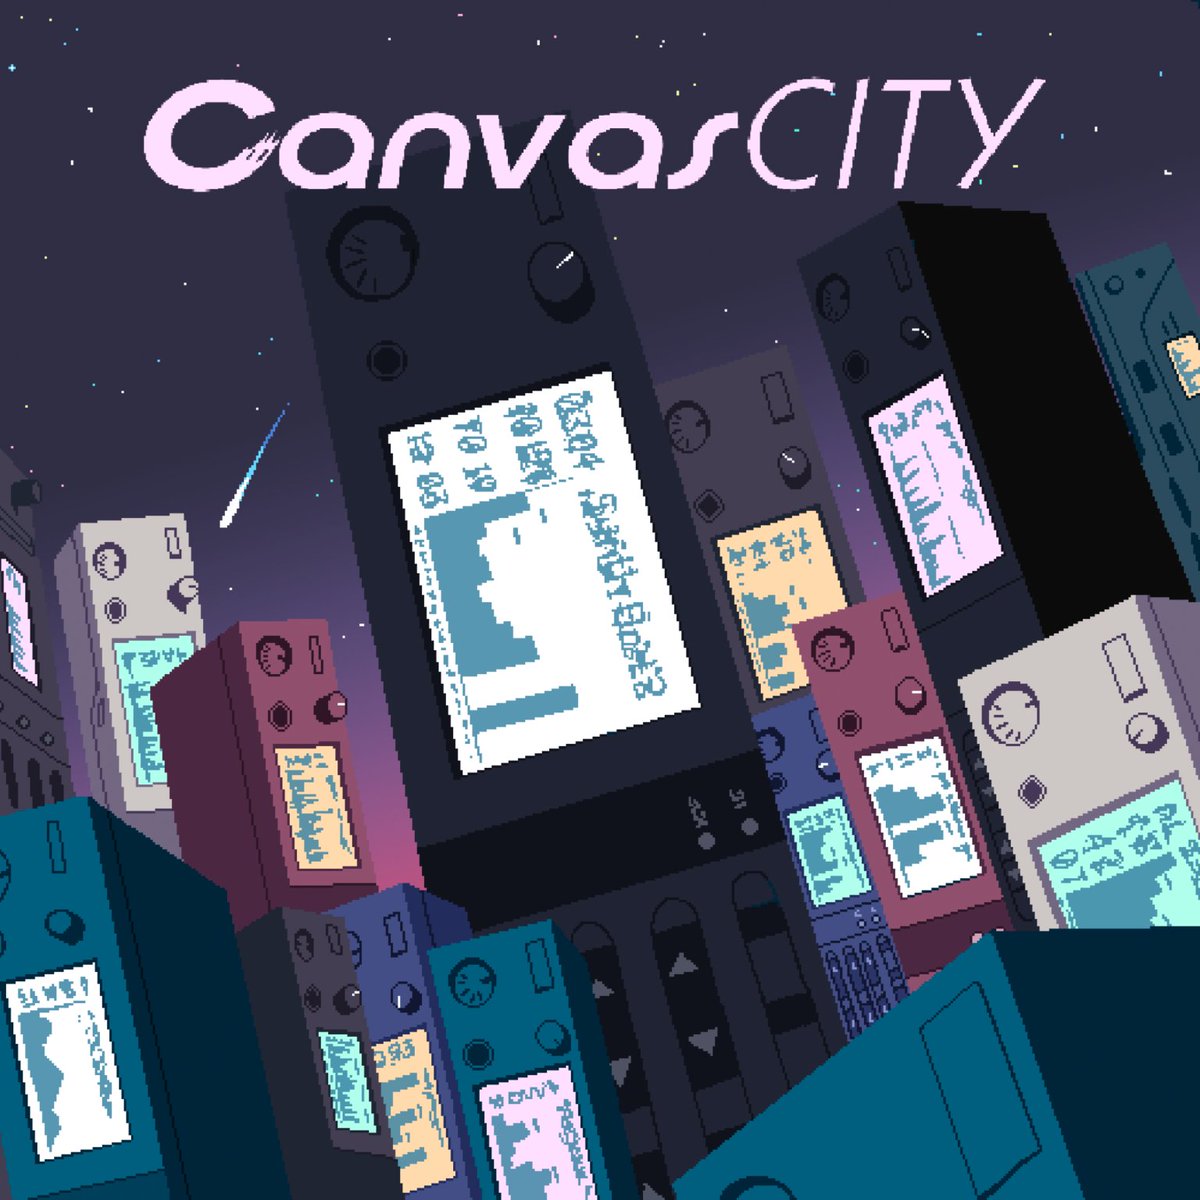 Take a trip to CANVAS CITY, where the bops are pretty, and the tracks all MIDI! Featuring the legendary talents of George @TheMightyFatMan Sanger, alongside modern maestros like @DaleNorth, @PeterReidJones, @HunterBridges and more, CANVAS CITY delivers 17 unforgettable tracks…